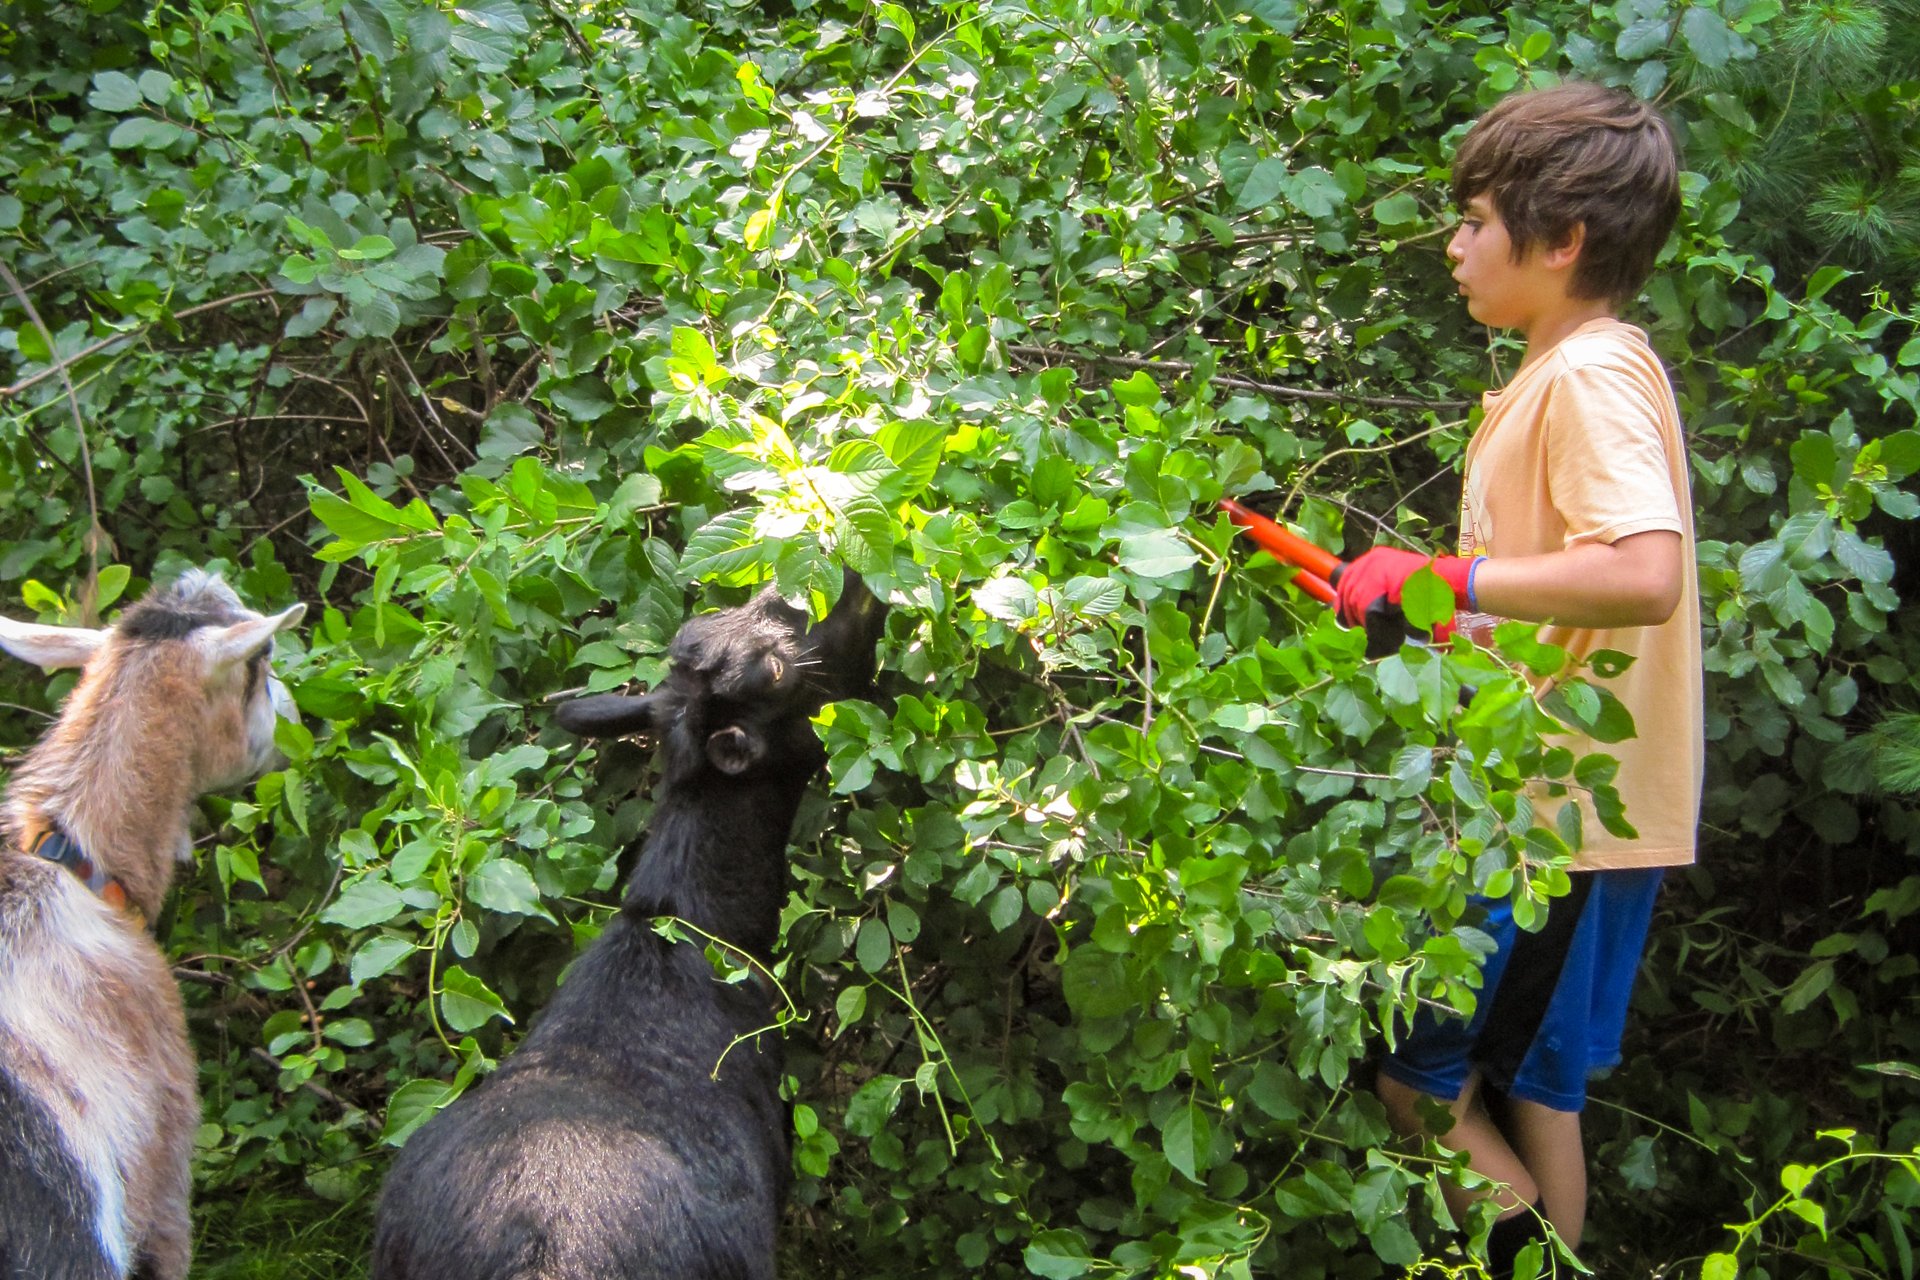 A camper at Habitat Nature Camp wearing gloves and using loppers to trim back invasive plants, with two goats beside him helping by munching on leaves